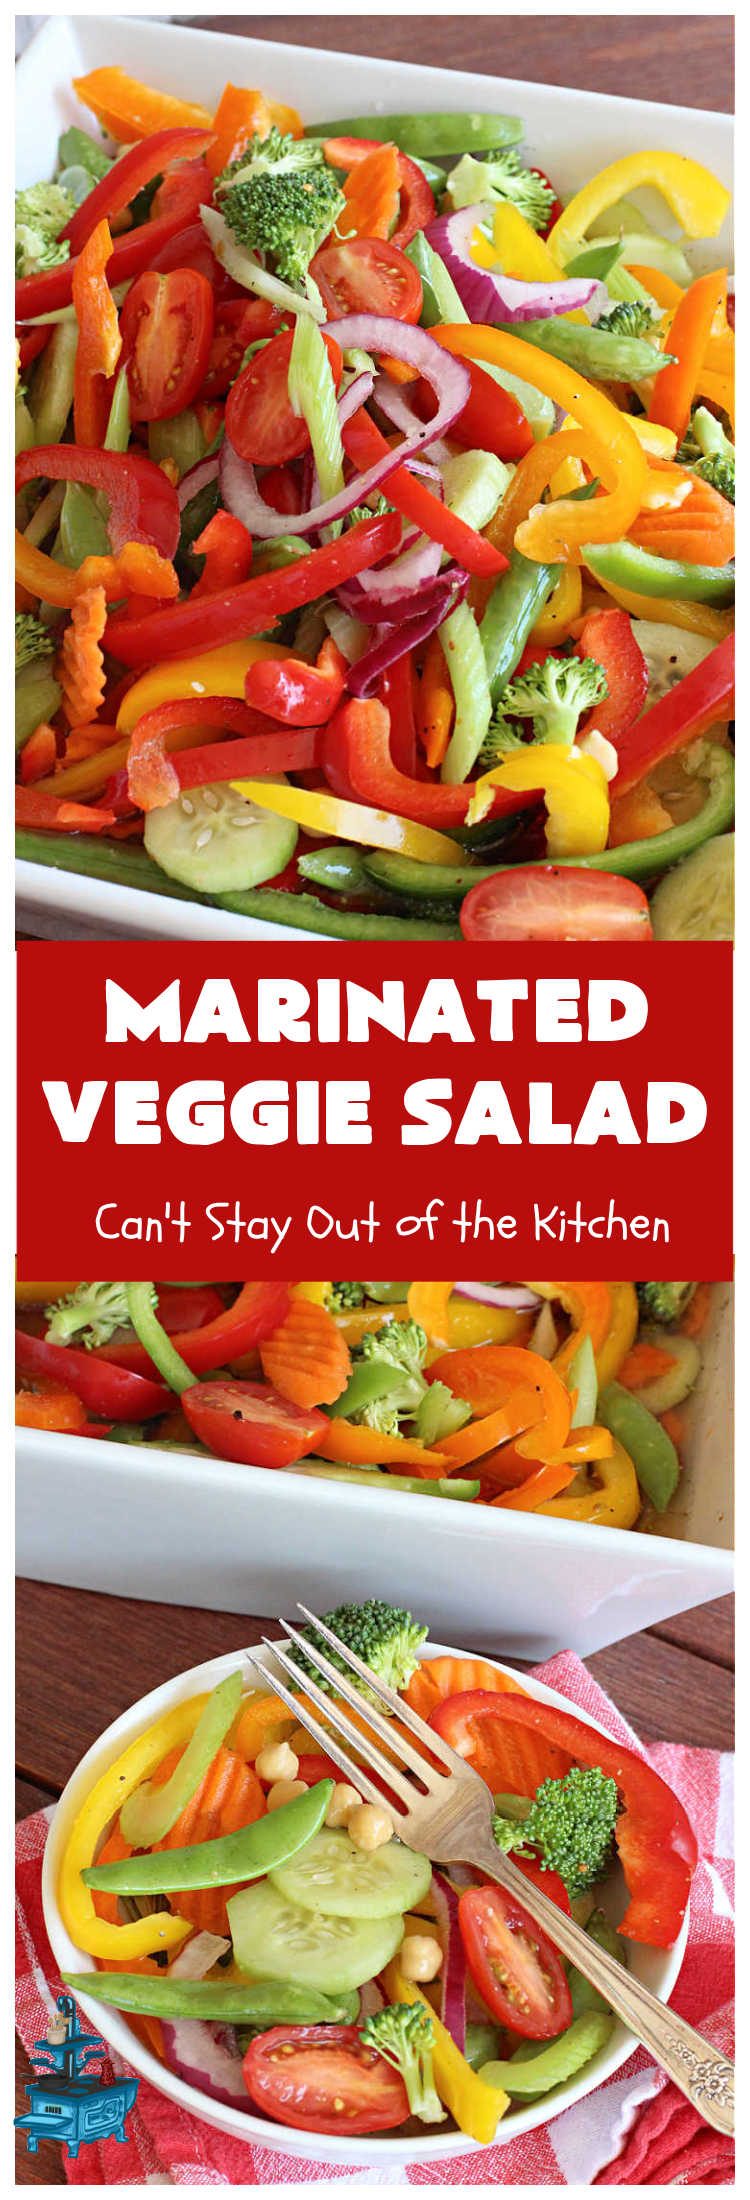 Marinated Veggie Salad | Can't Stay Out of the Kitchen | this fantastic #MarinatedSalad #recipe includes lots of fresh, crispy, crunchy veggies and a delicious homemade #SaladDressing (marinade) that uses NO oil. It's #vegan, #GlutenFree & a delightful #salad option for any company meal including #holidays. #tomatoes #chickpeas #carrots #cucumber #broccoli #SugarSnapPeas #BellPeppers #MarinatedVeggieSalad